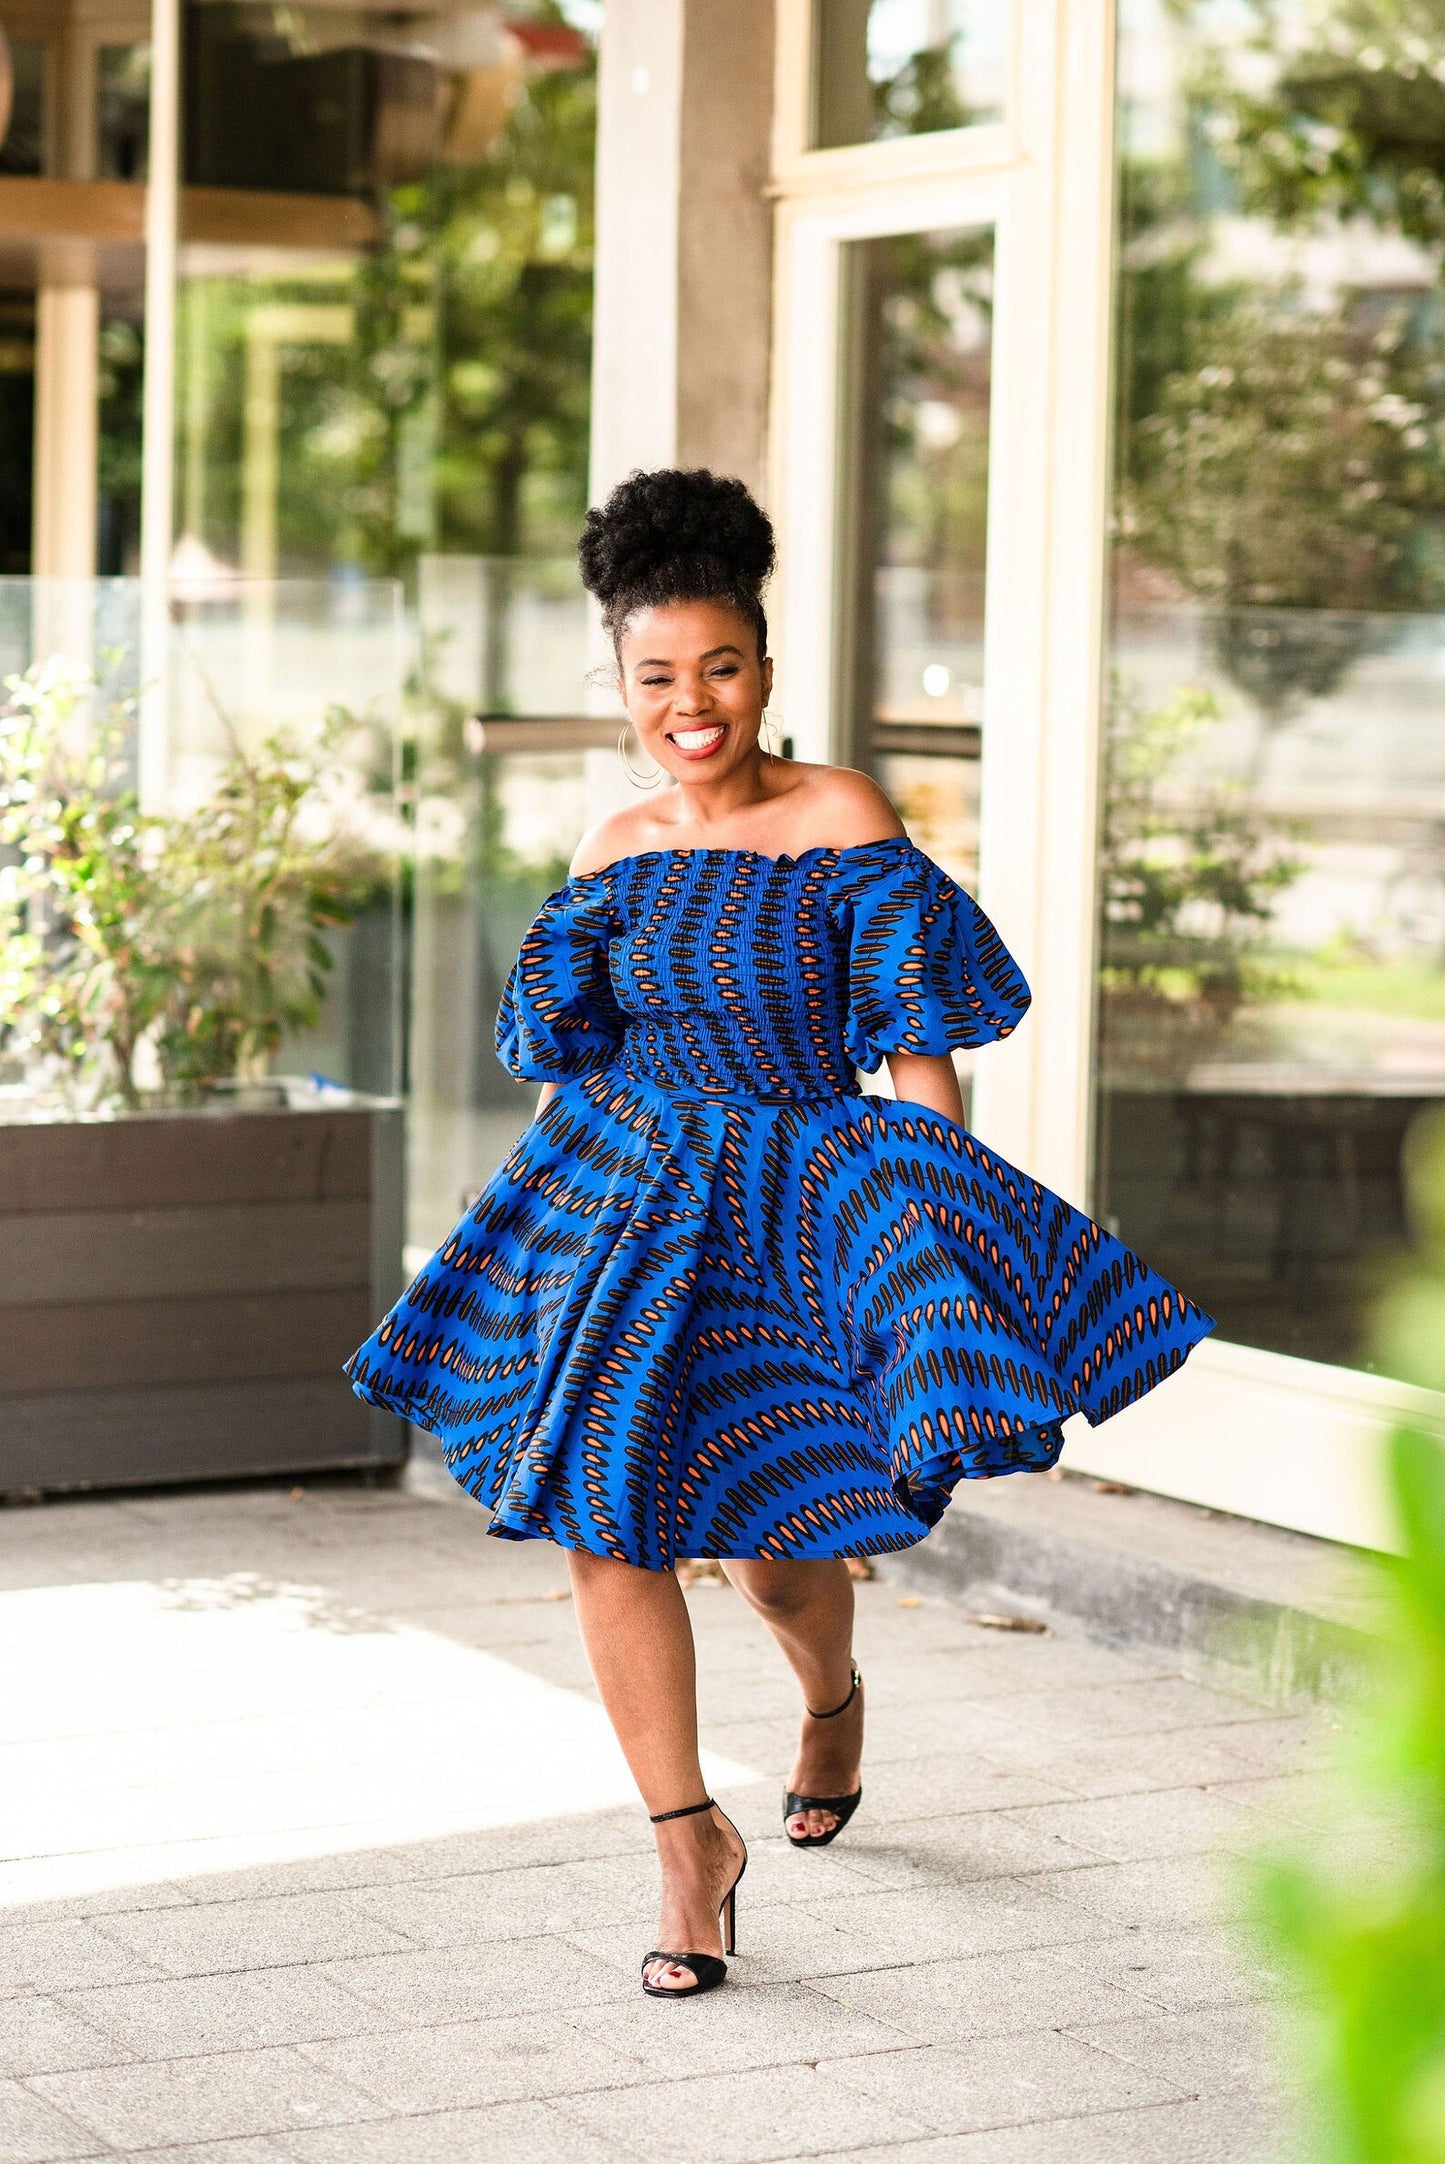 BLUE AFRICAN ANKARA PRINT PLUS SIZE CLOTHING PARTY DRESS